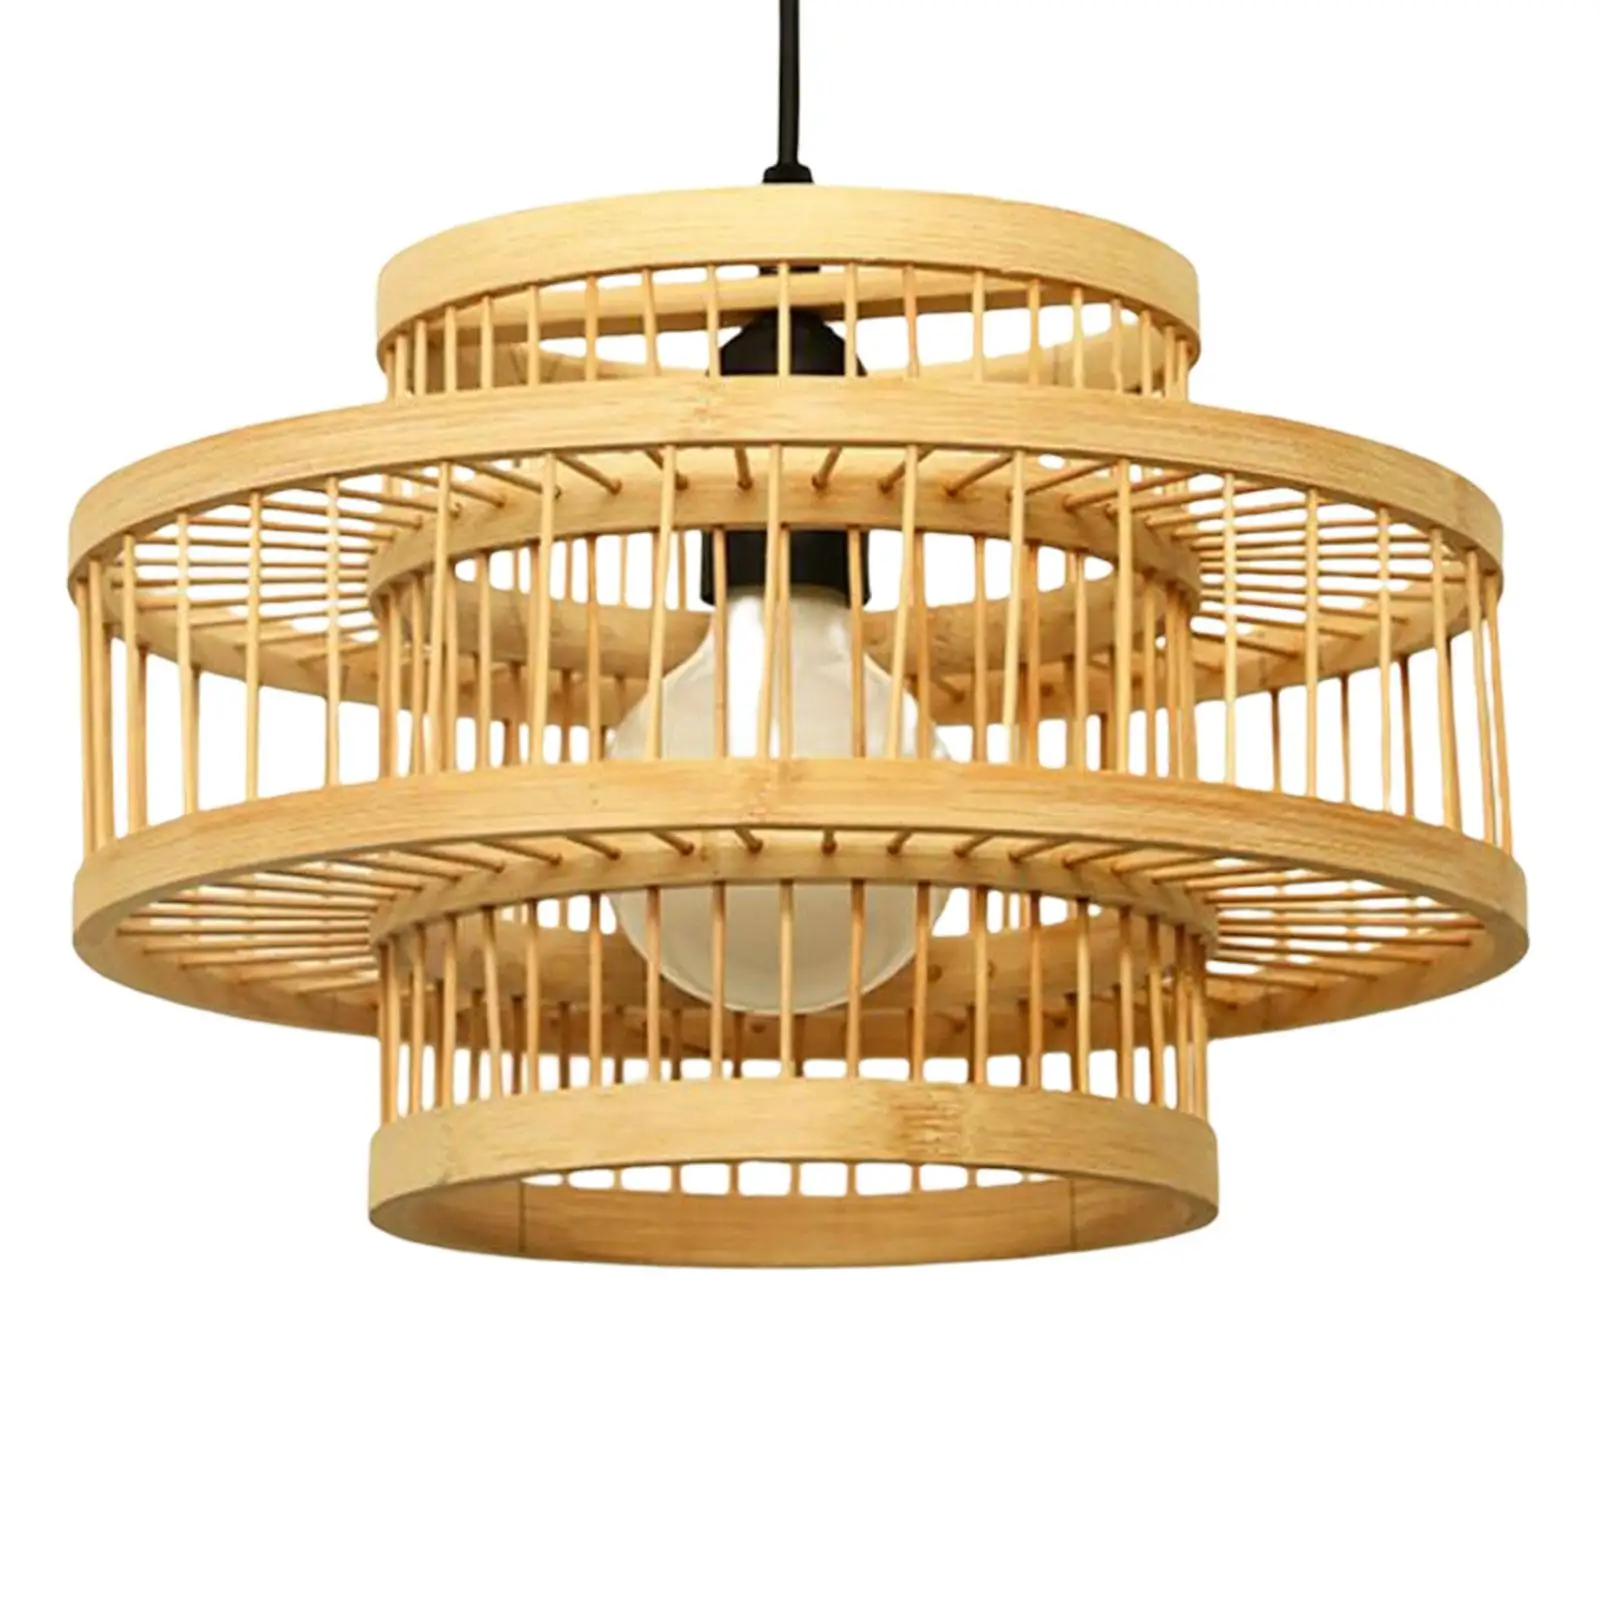 Bamboo Lamp Shade Ceiling Light Cover Chandelier Shade Hanging Retro Style Lampshade for Living Room Restaurant Kitchen Bedroom